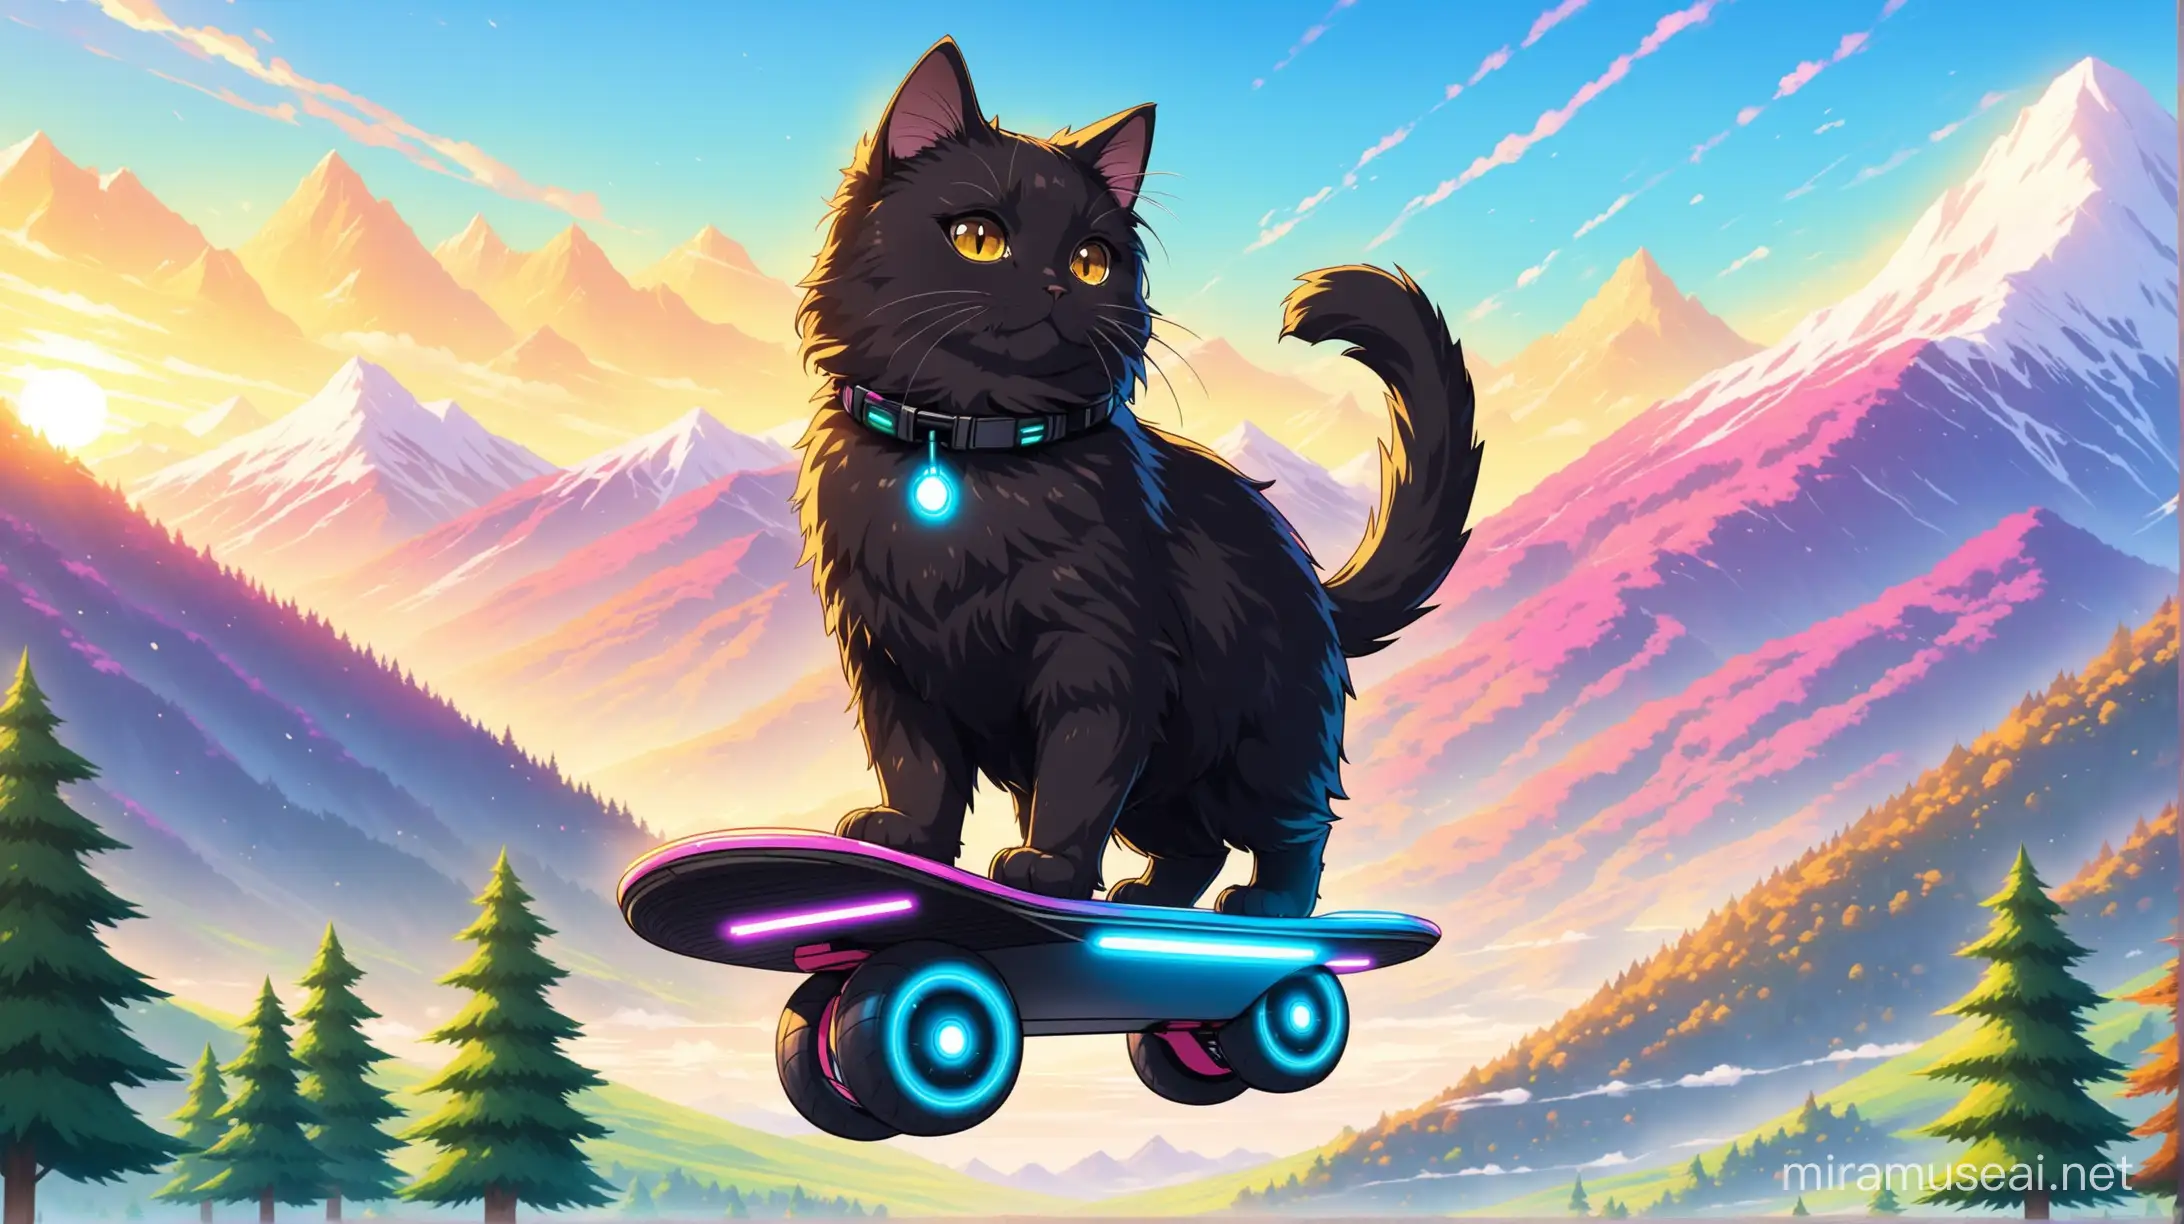 Black fluffy cat on a hoverboard sees the sugar trees next to the mountains